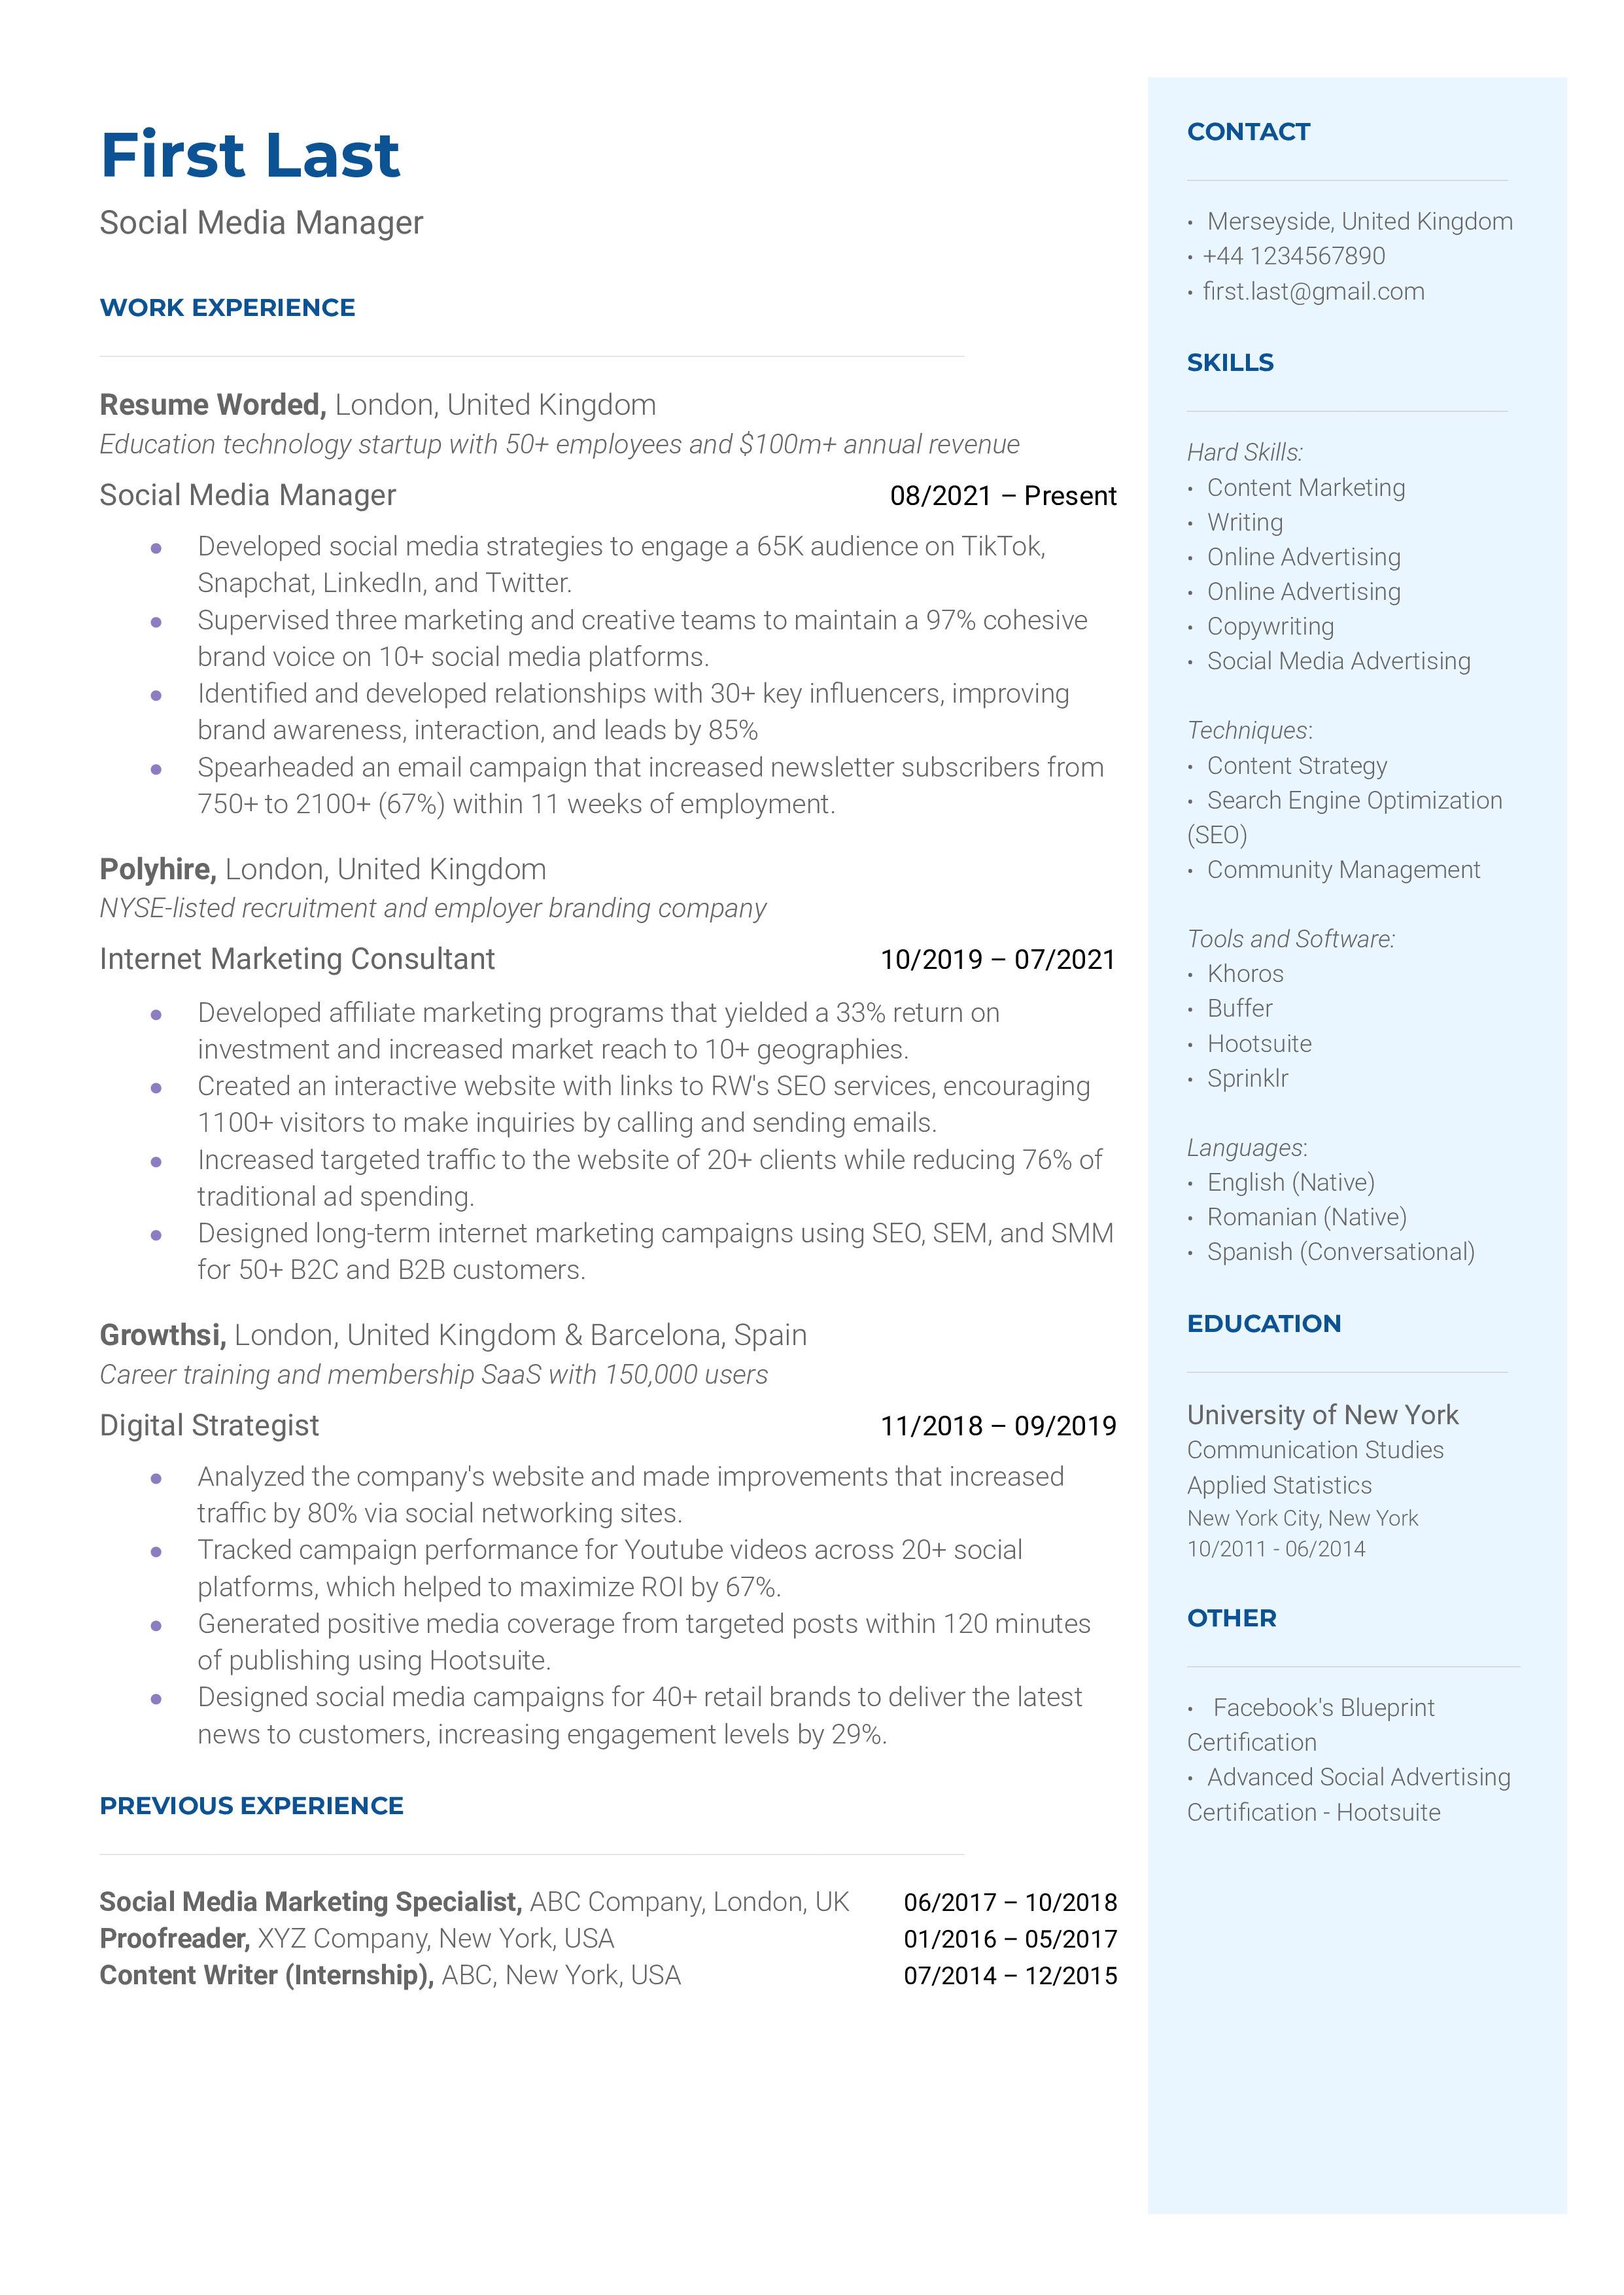 A resume for a social media manager with a master's degree in journalism and prior experience as a marketing assistant and market analyst.